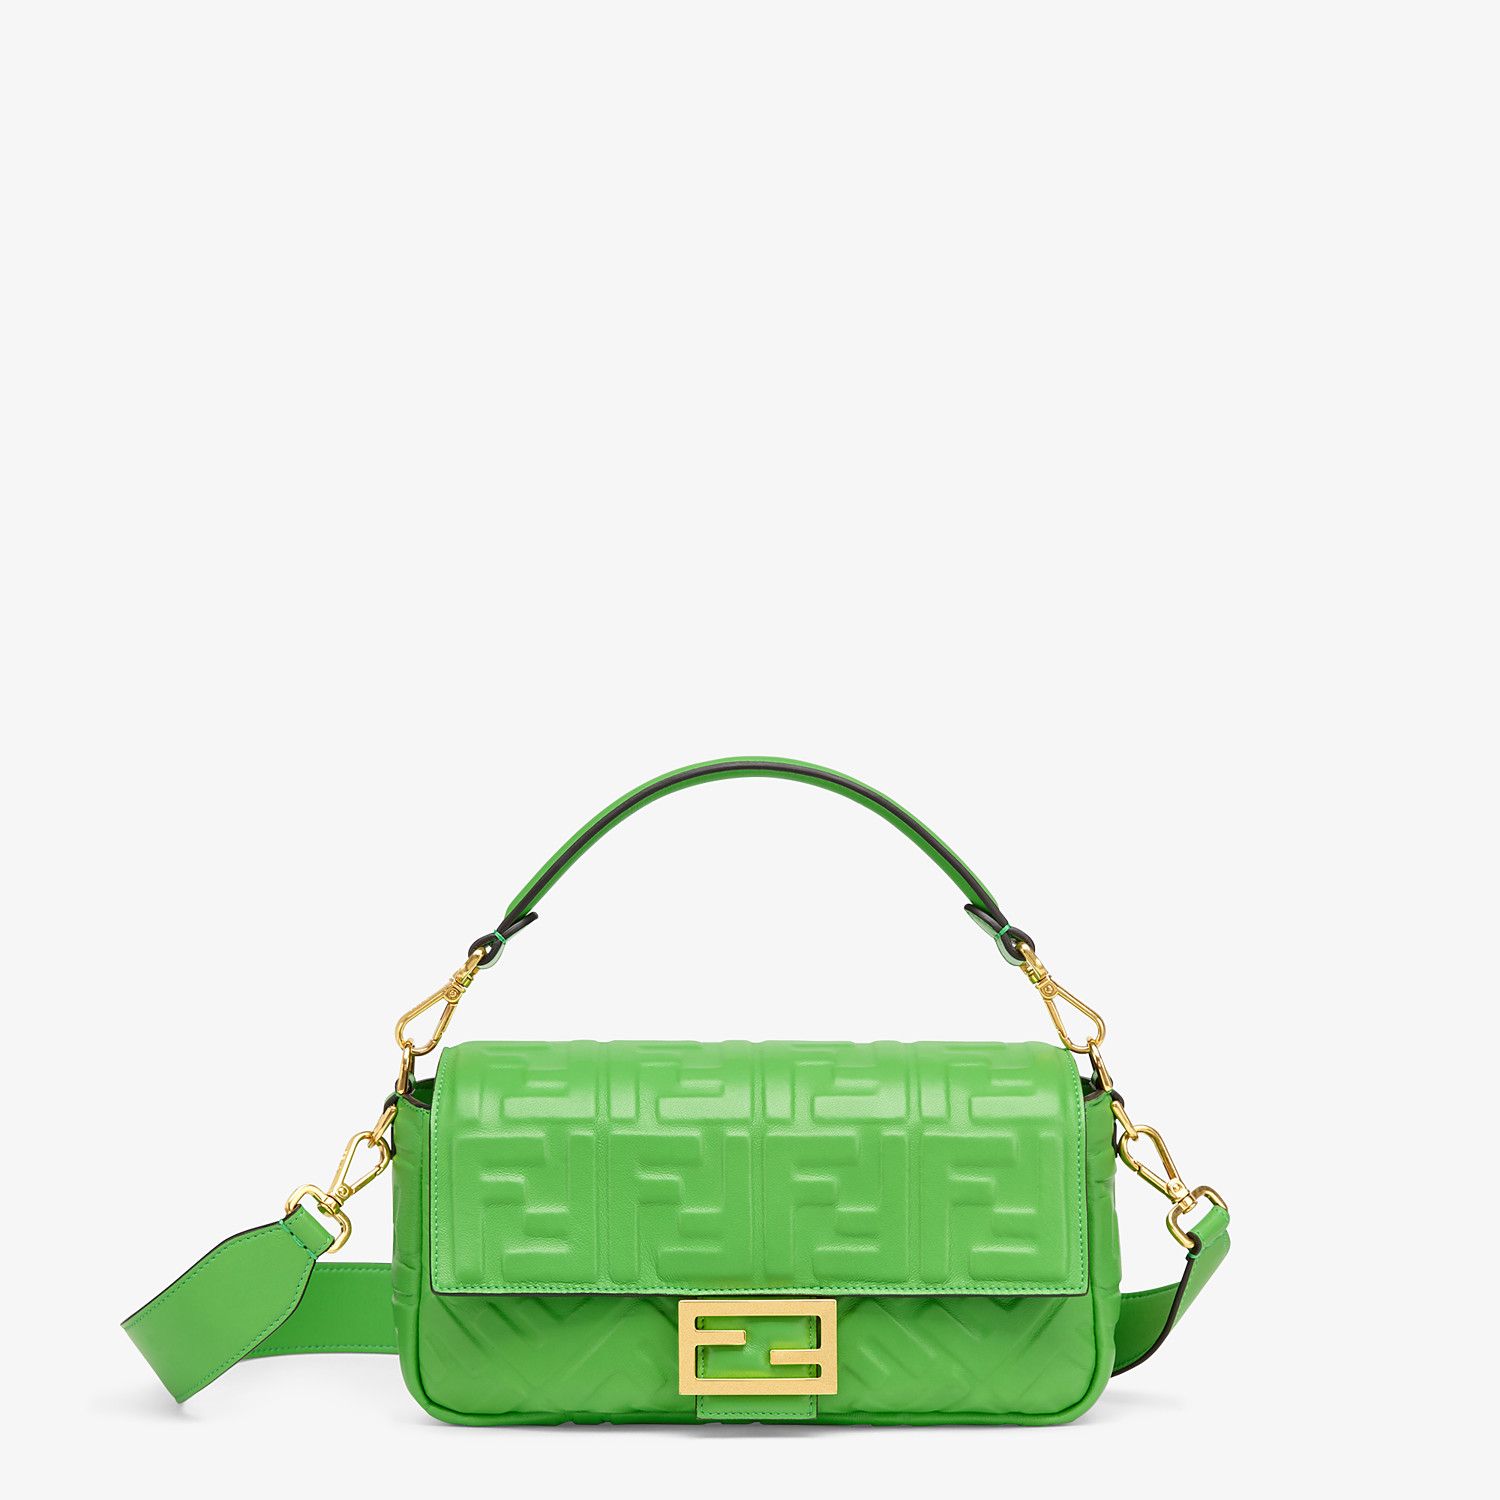 36 Colorful Purses That Are a Total Vibe | Who What Wear